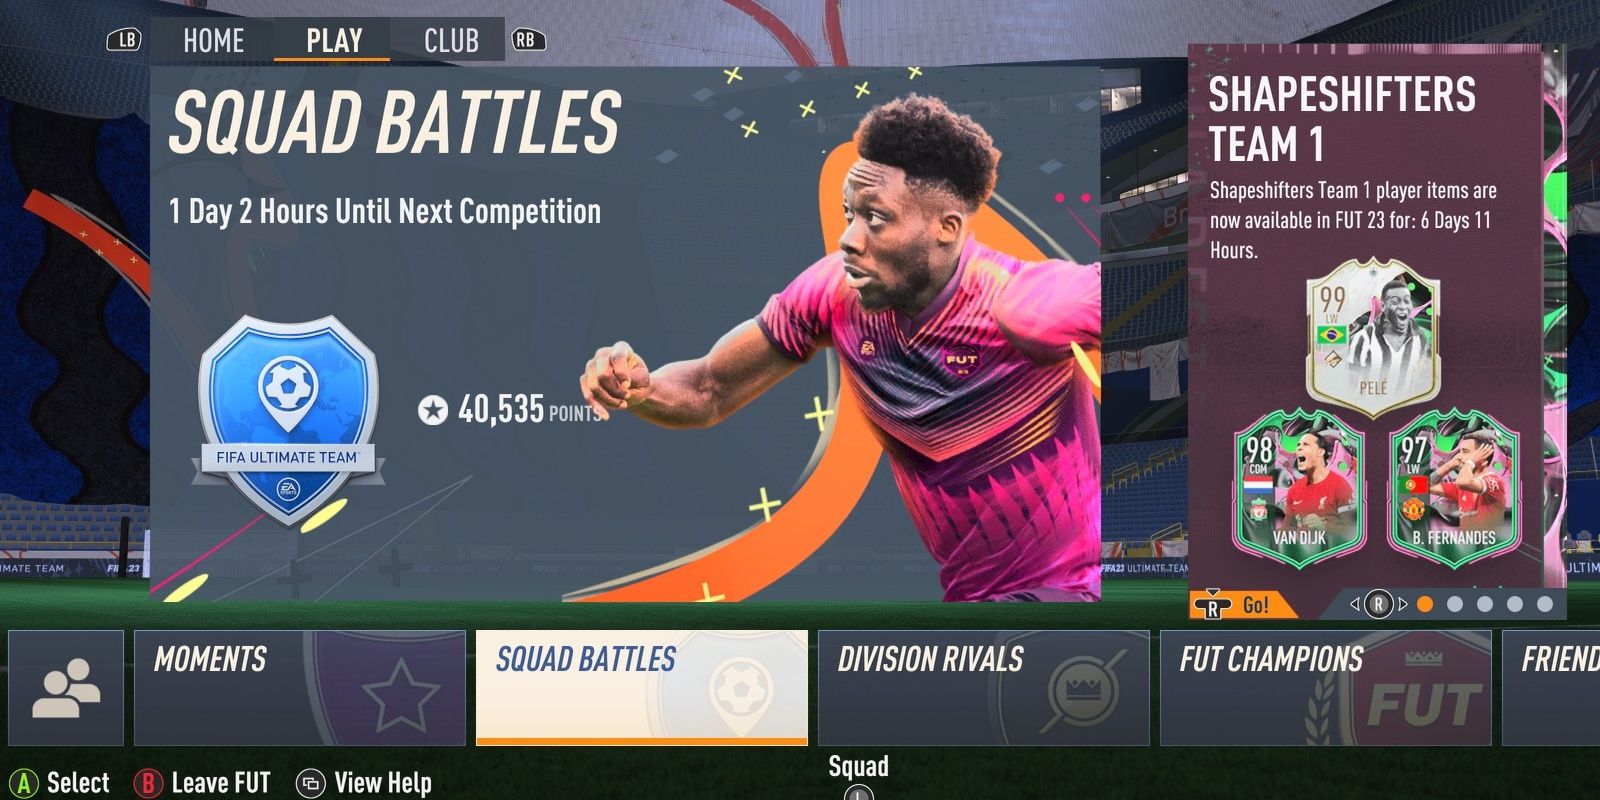 The remaining time for weekly Squad Battles displayed in the menu of FIFA 23.